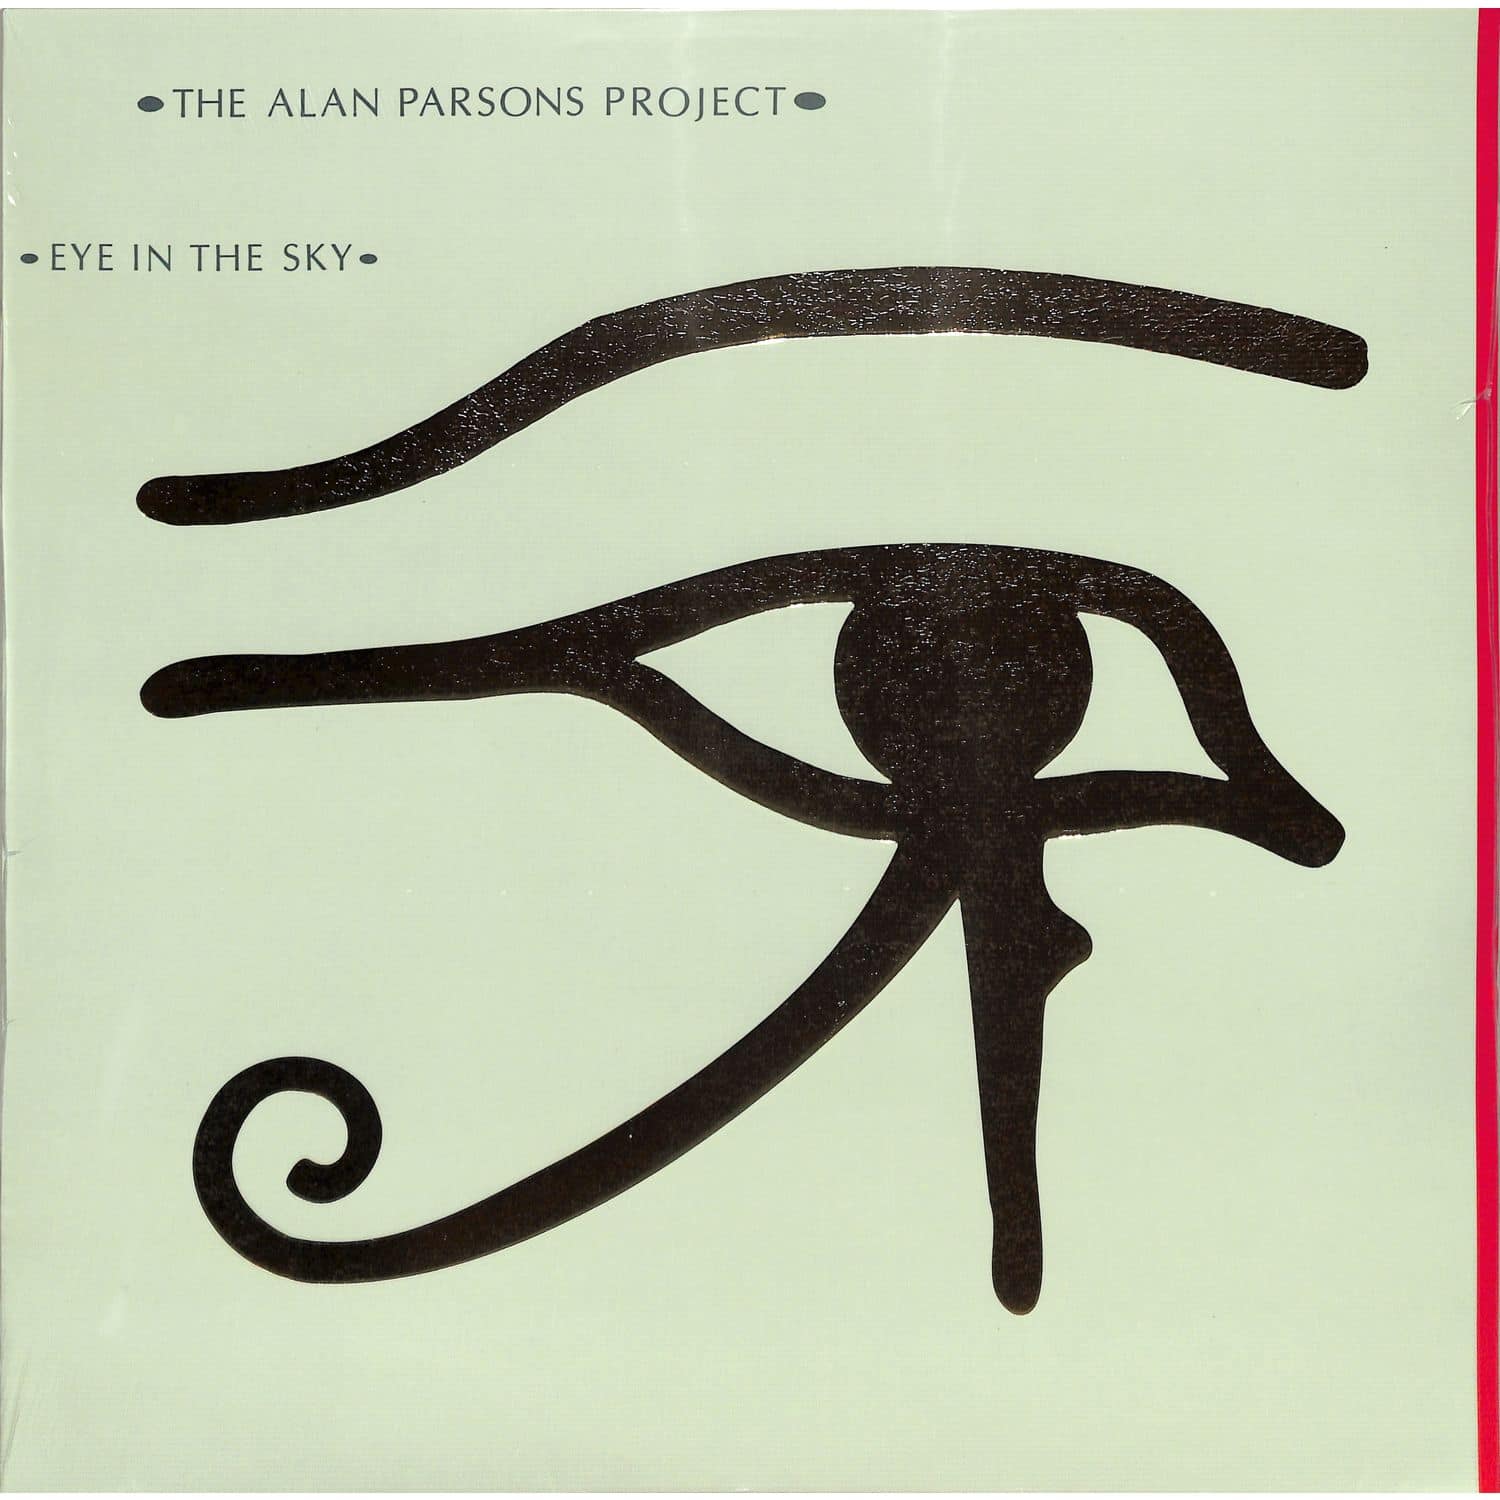 The Alan Parsons Project - eye in the sky (180g lp)